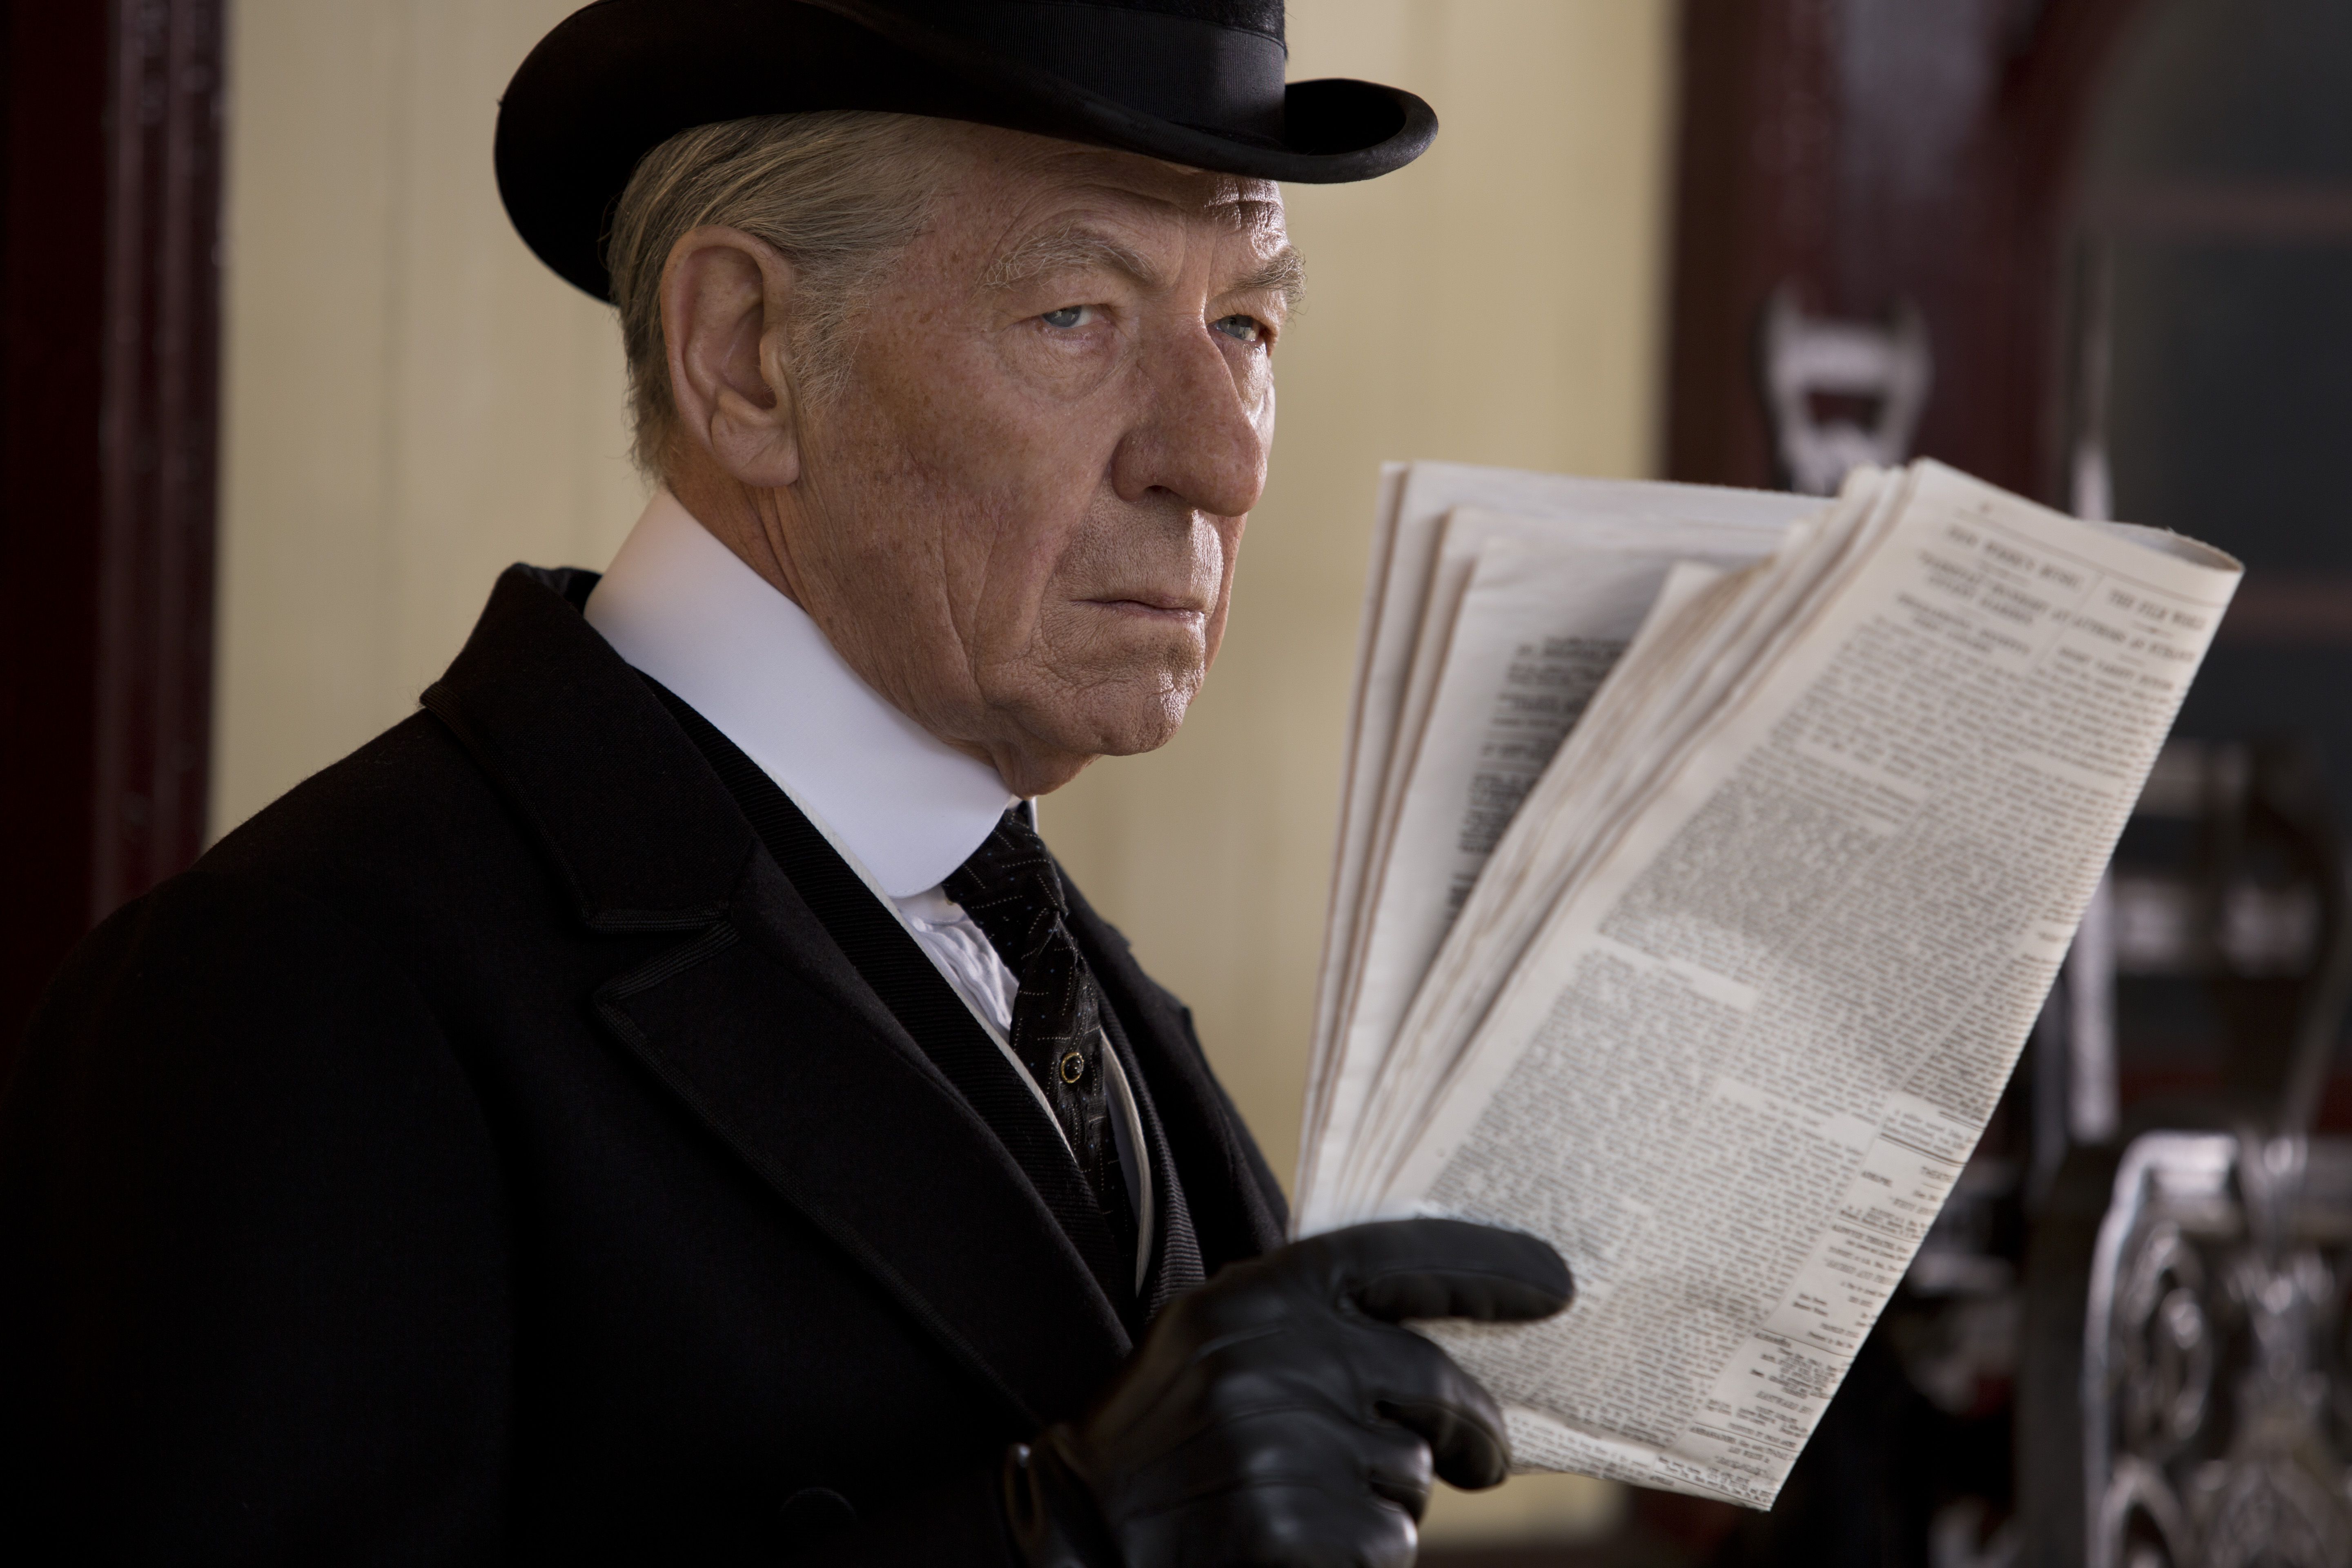 At cinemas: Quite the Holmes coming